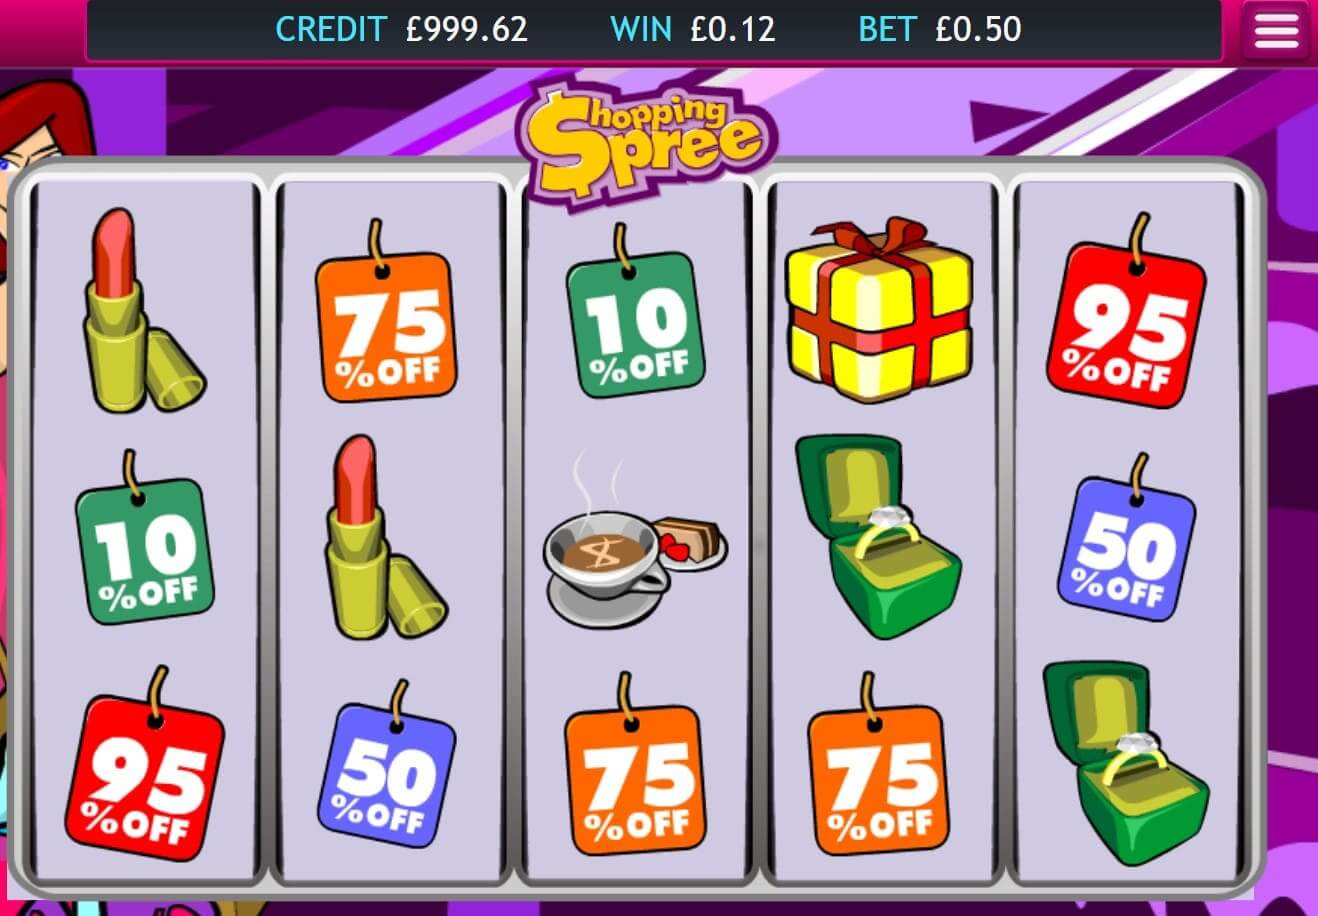 Shopping Spree Free Spins